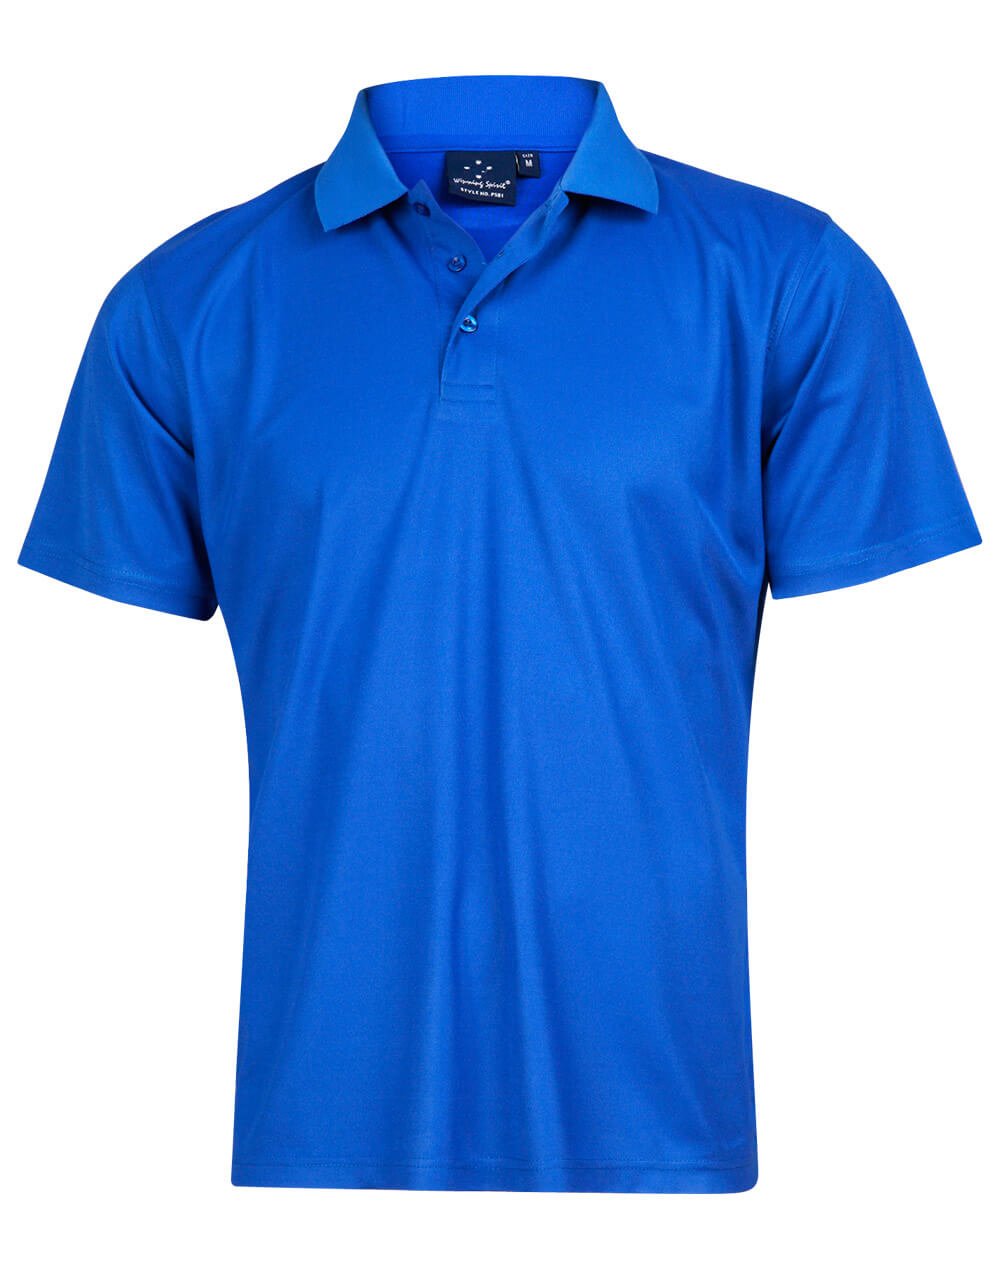 Mens Verve Polo - Ps81 - Best Embroidery